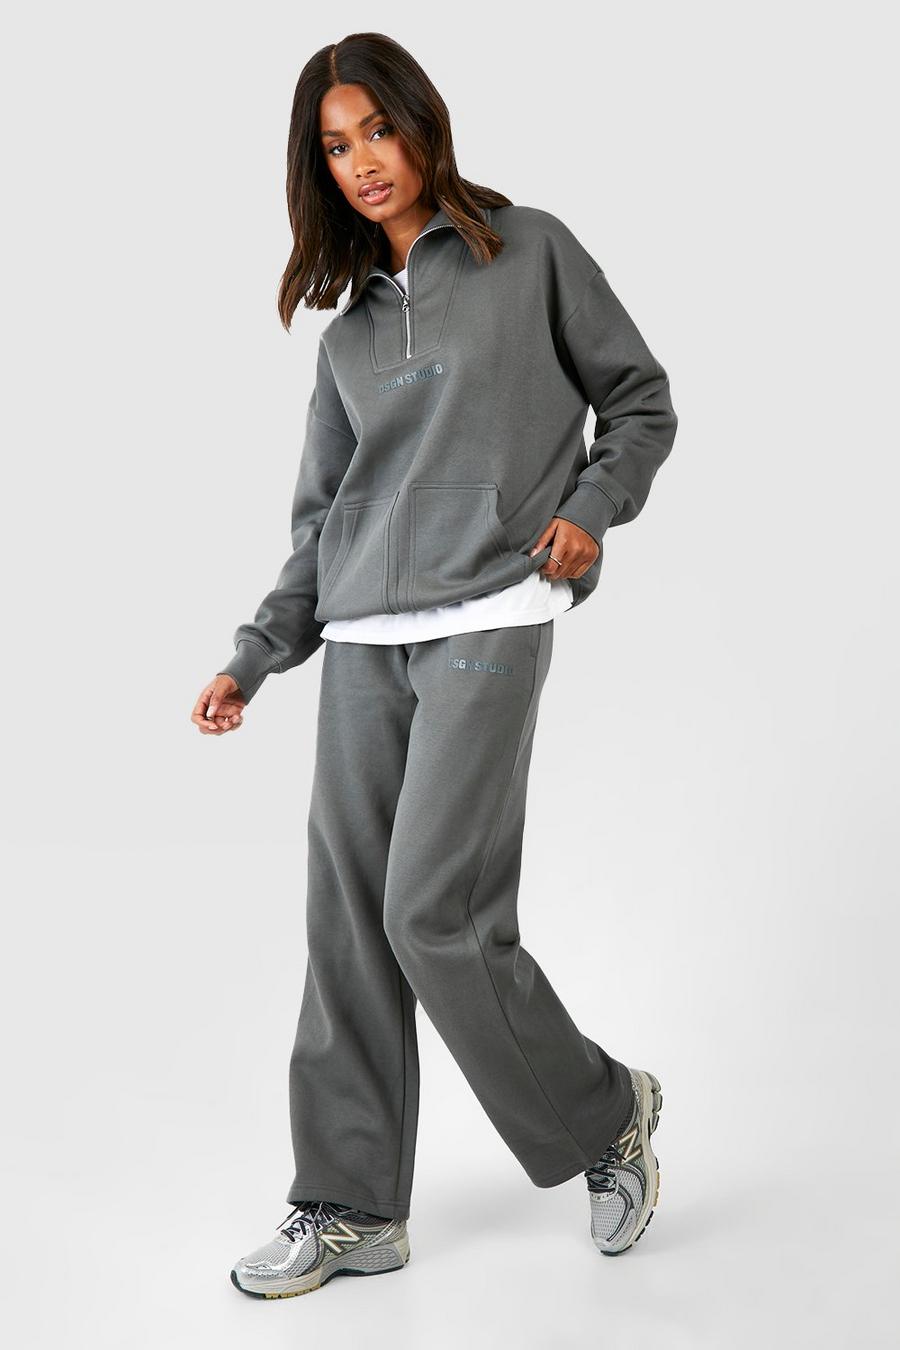 Charcoal Cropped Half Zip Sweatshirt And Cuffed Jogger Tracksuit